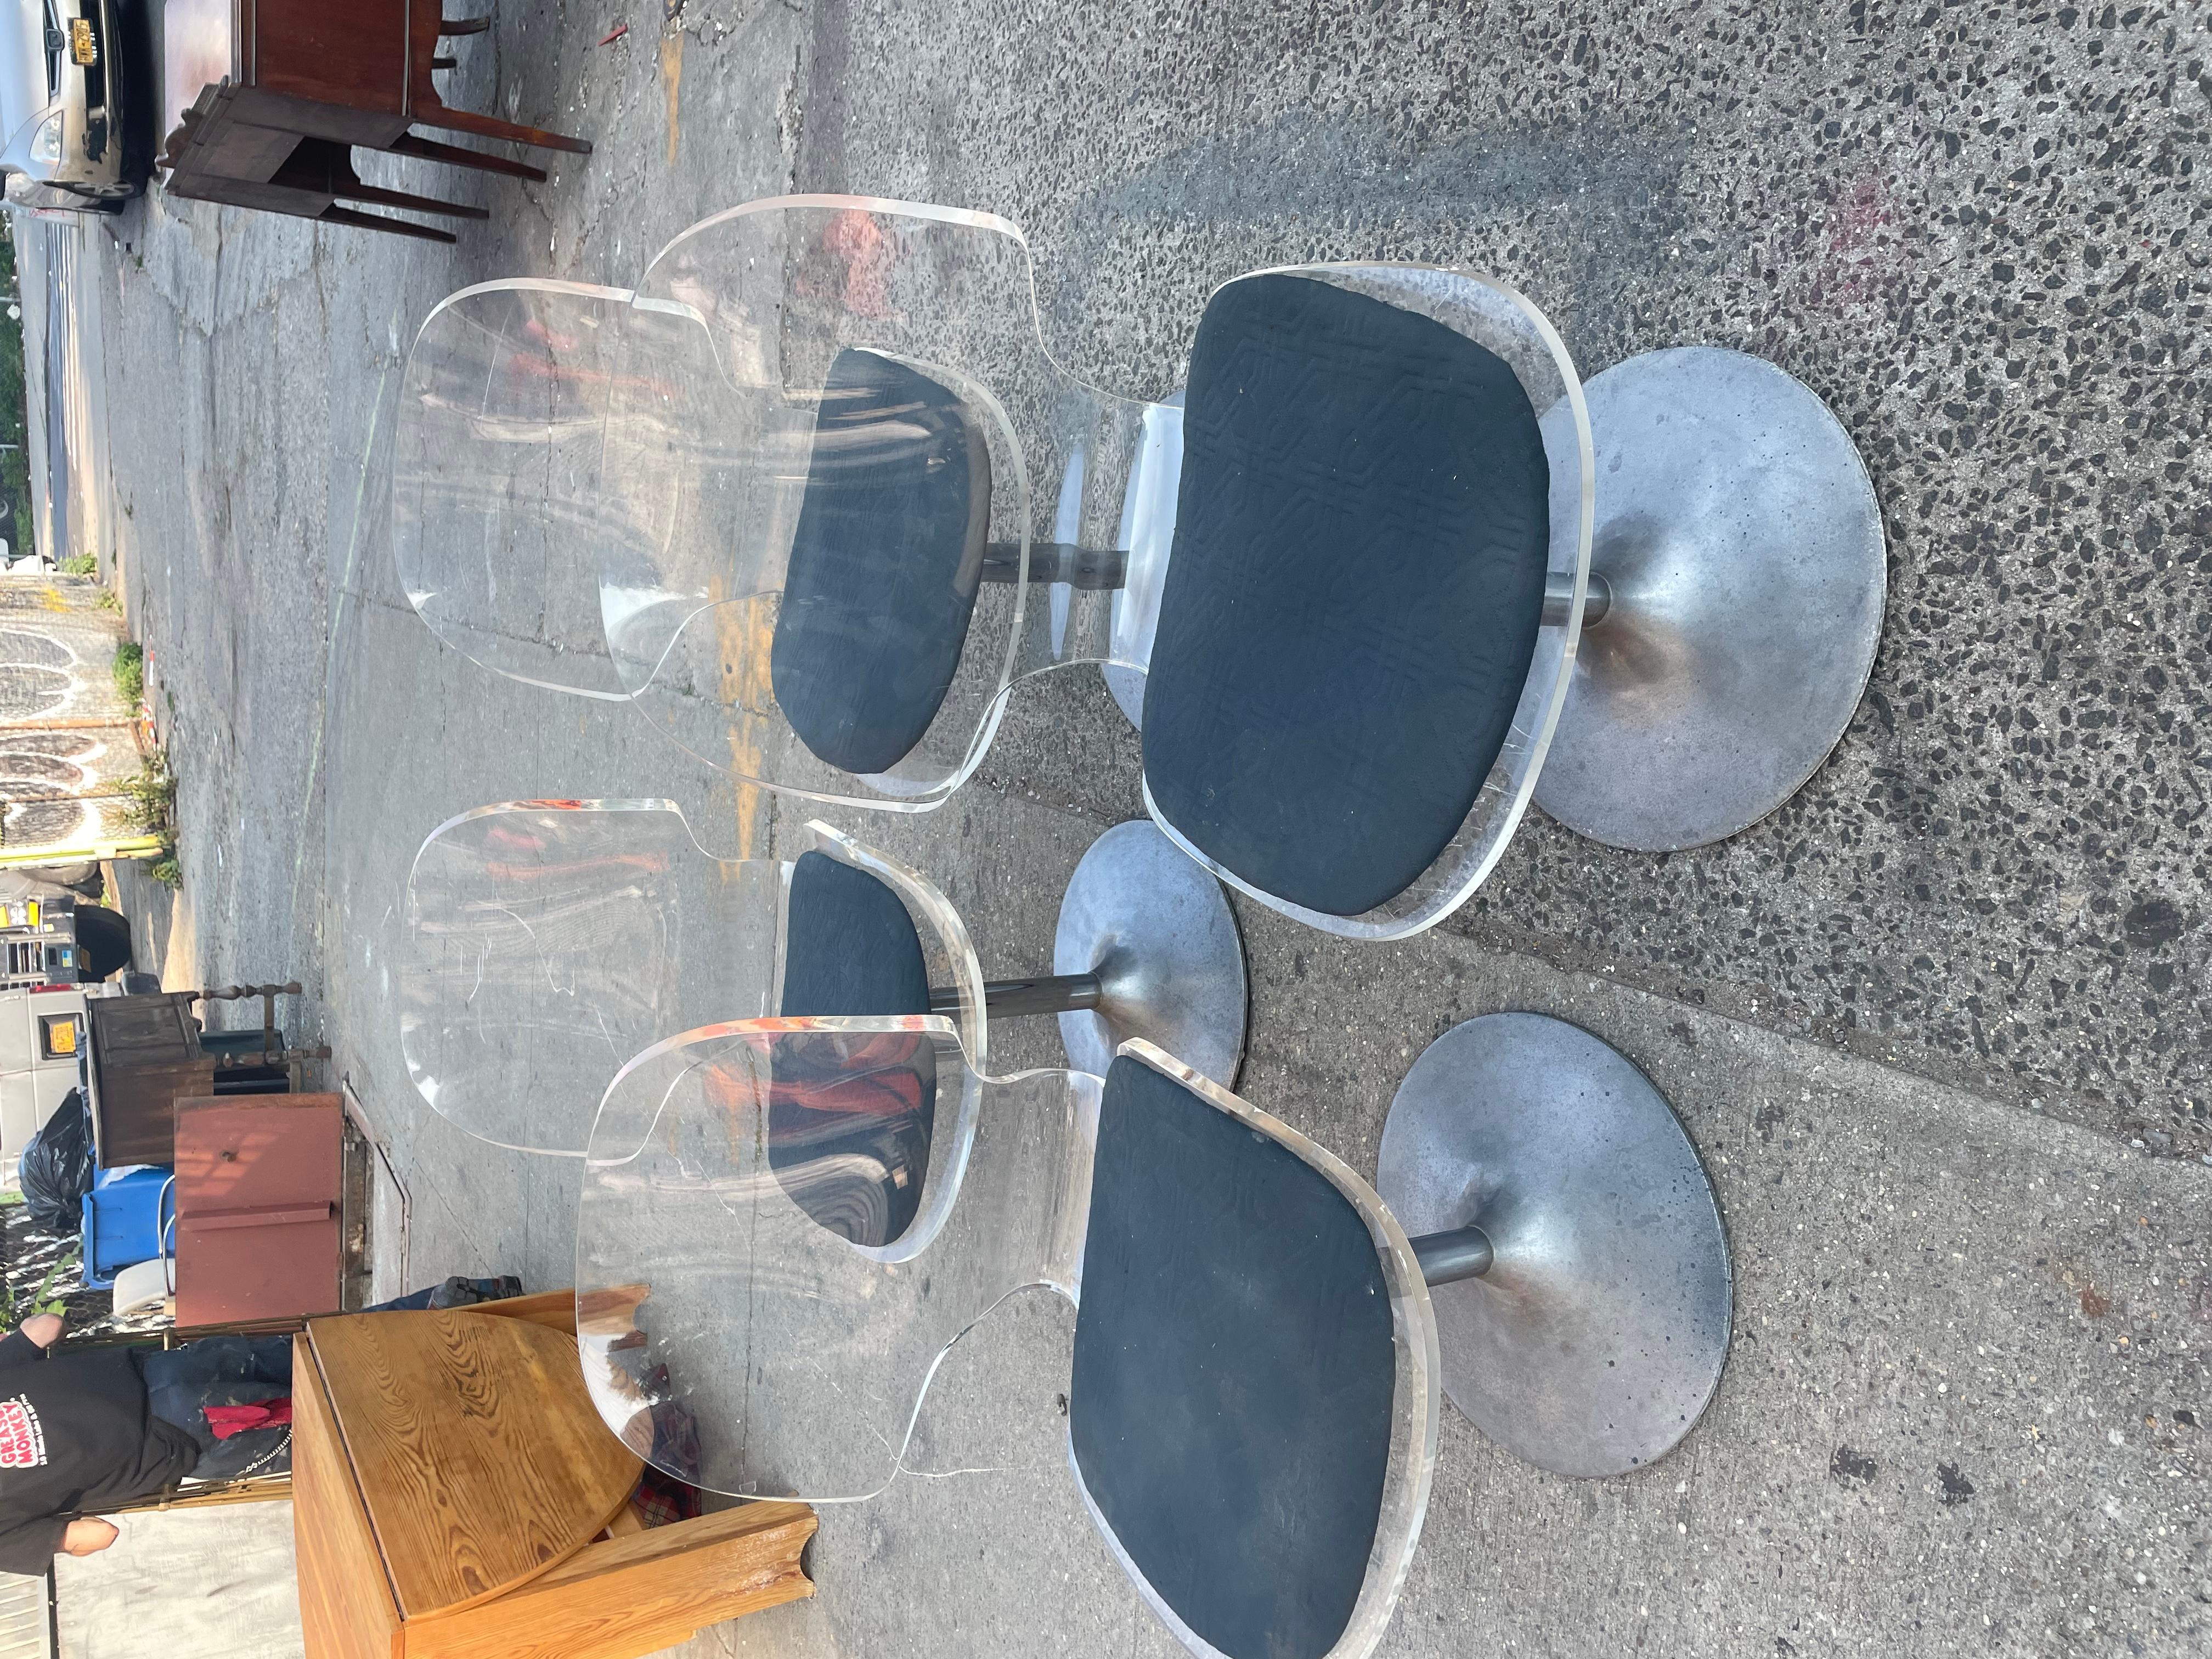 Beautiful set of 4 
Mid century modern
Clear lucite dining chairs
On aluminum bases
With grey cushioned seat cushions
Great for any retro dining table set